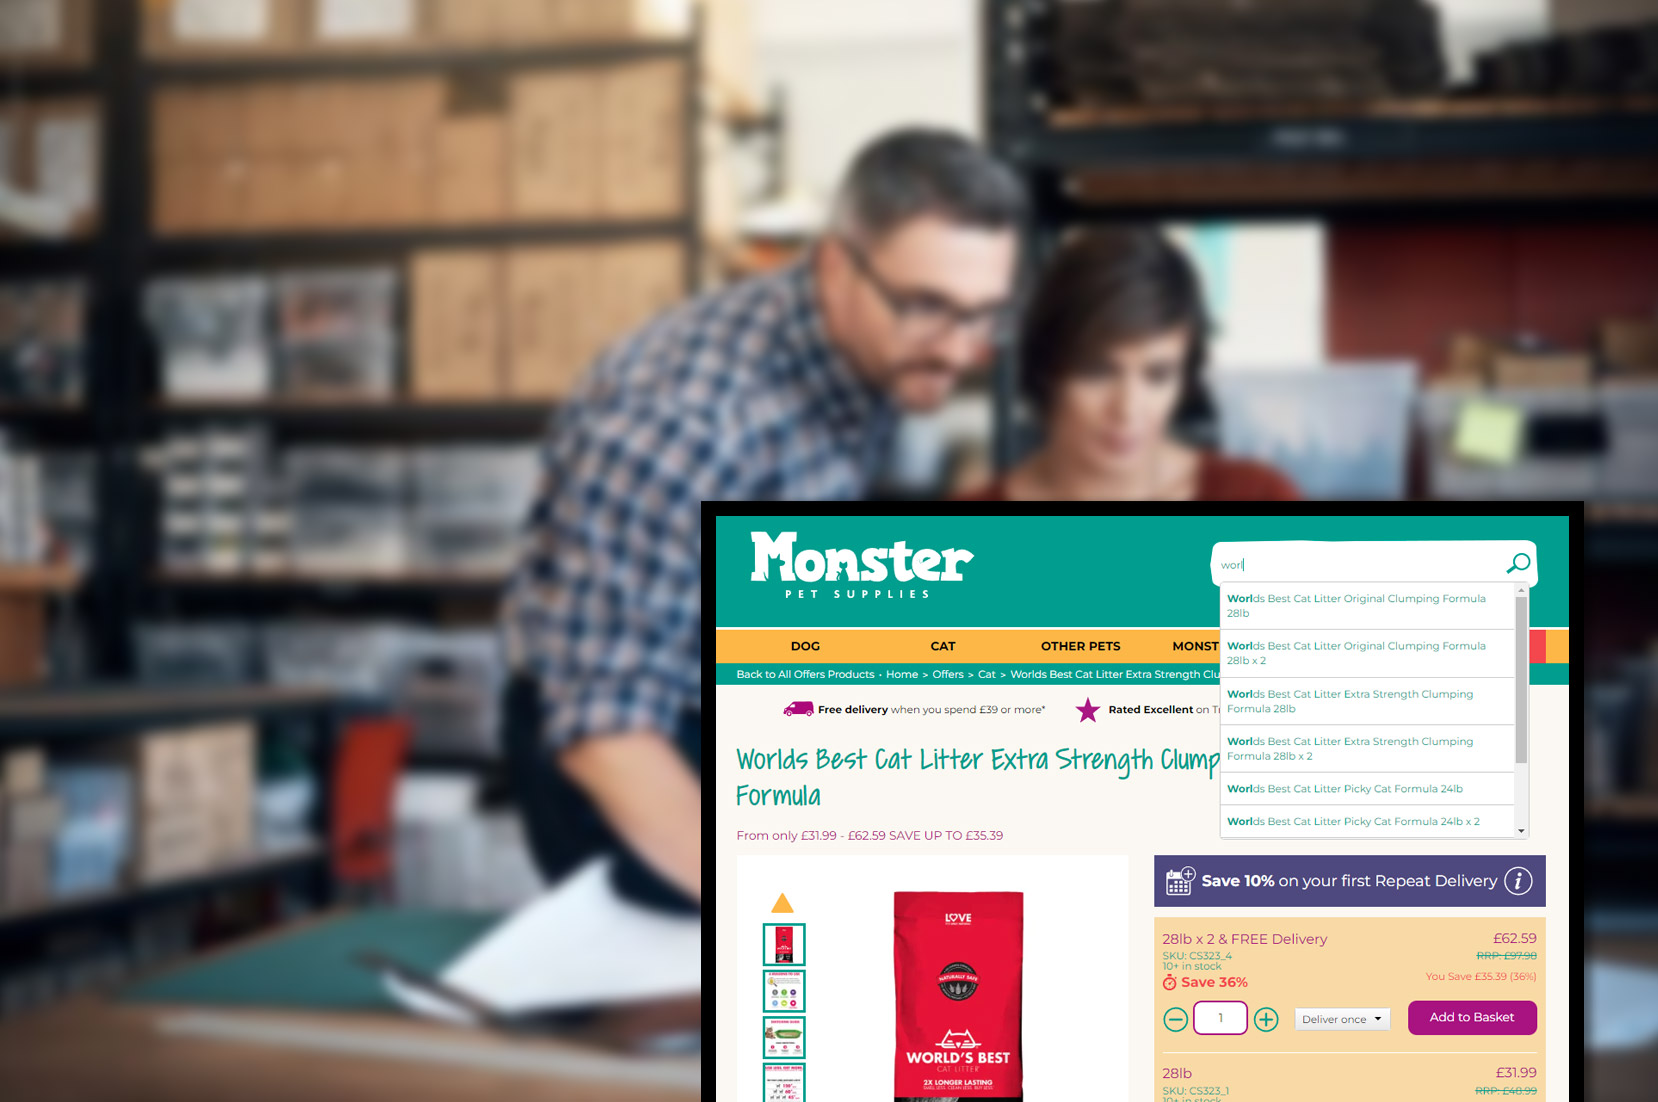 monsterpetsupplies-co-ukproduct-categories-keywords-and-brand-scraping-services